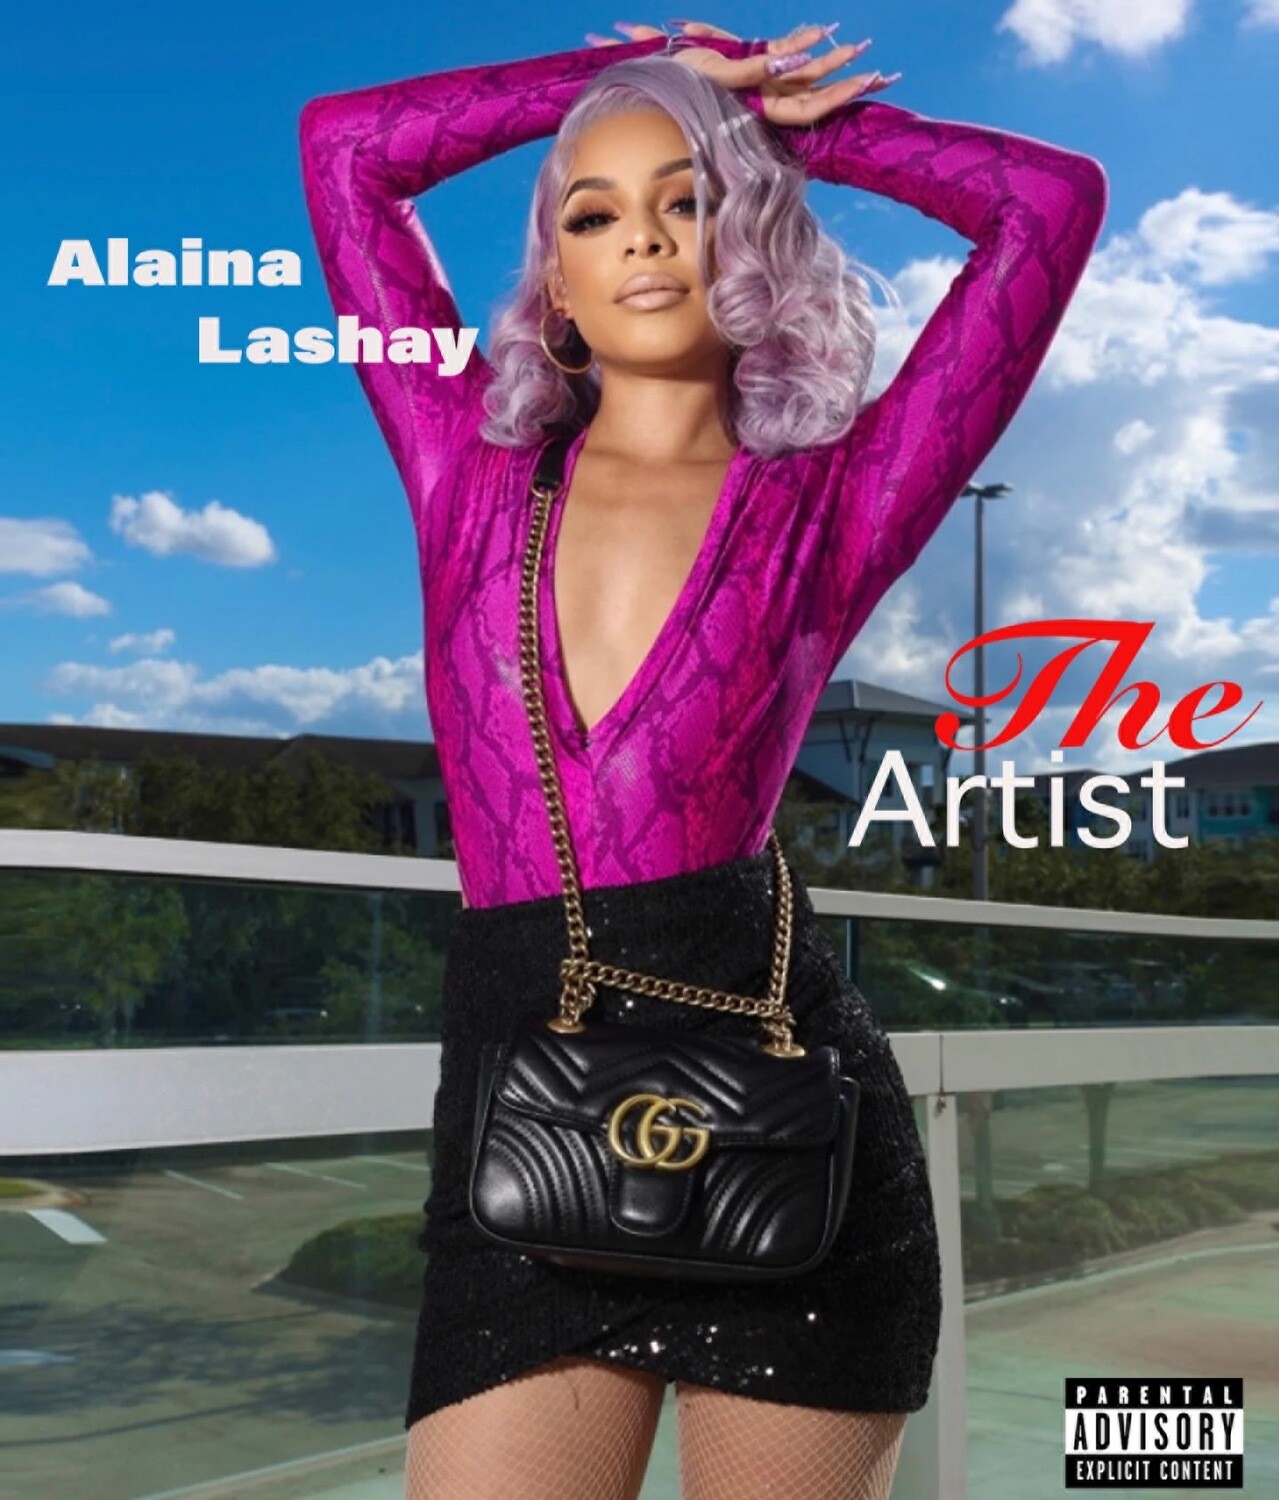 Alaina Lashay "New Album" -  A Hard Copy 20 song. (CD)
These songs will not be available anywhere else. No YouTube, No Spotify, No Internet, No Radio.  Limited Edition. read more for detail.